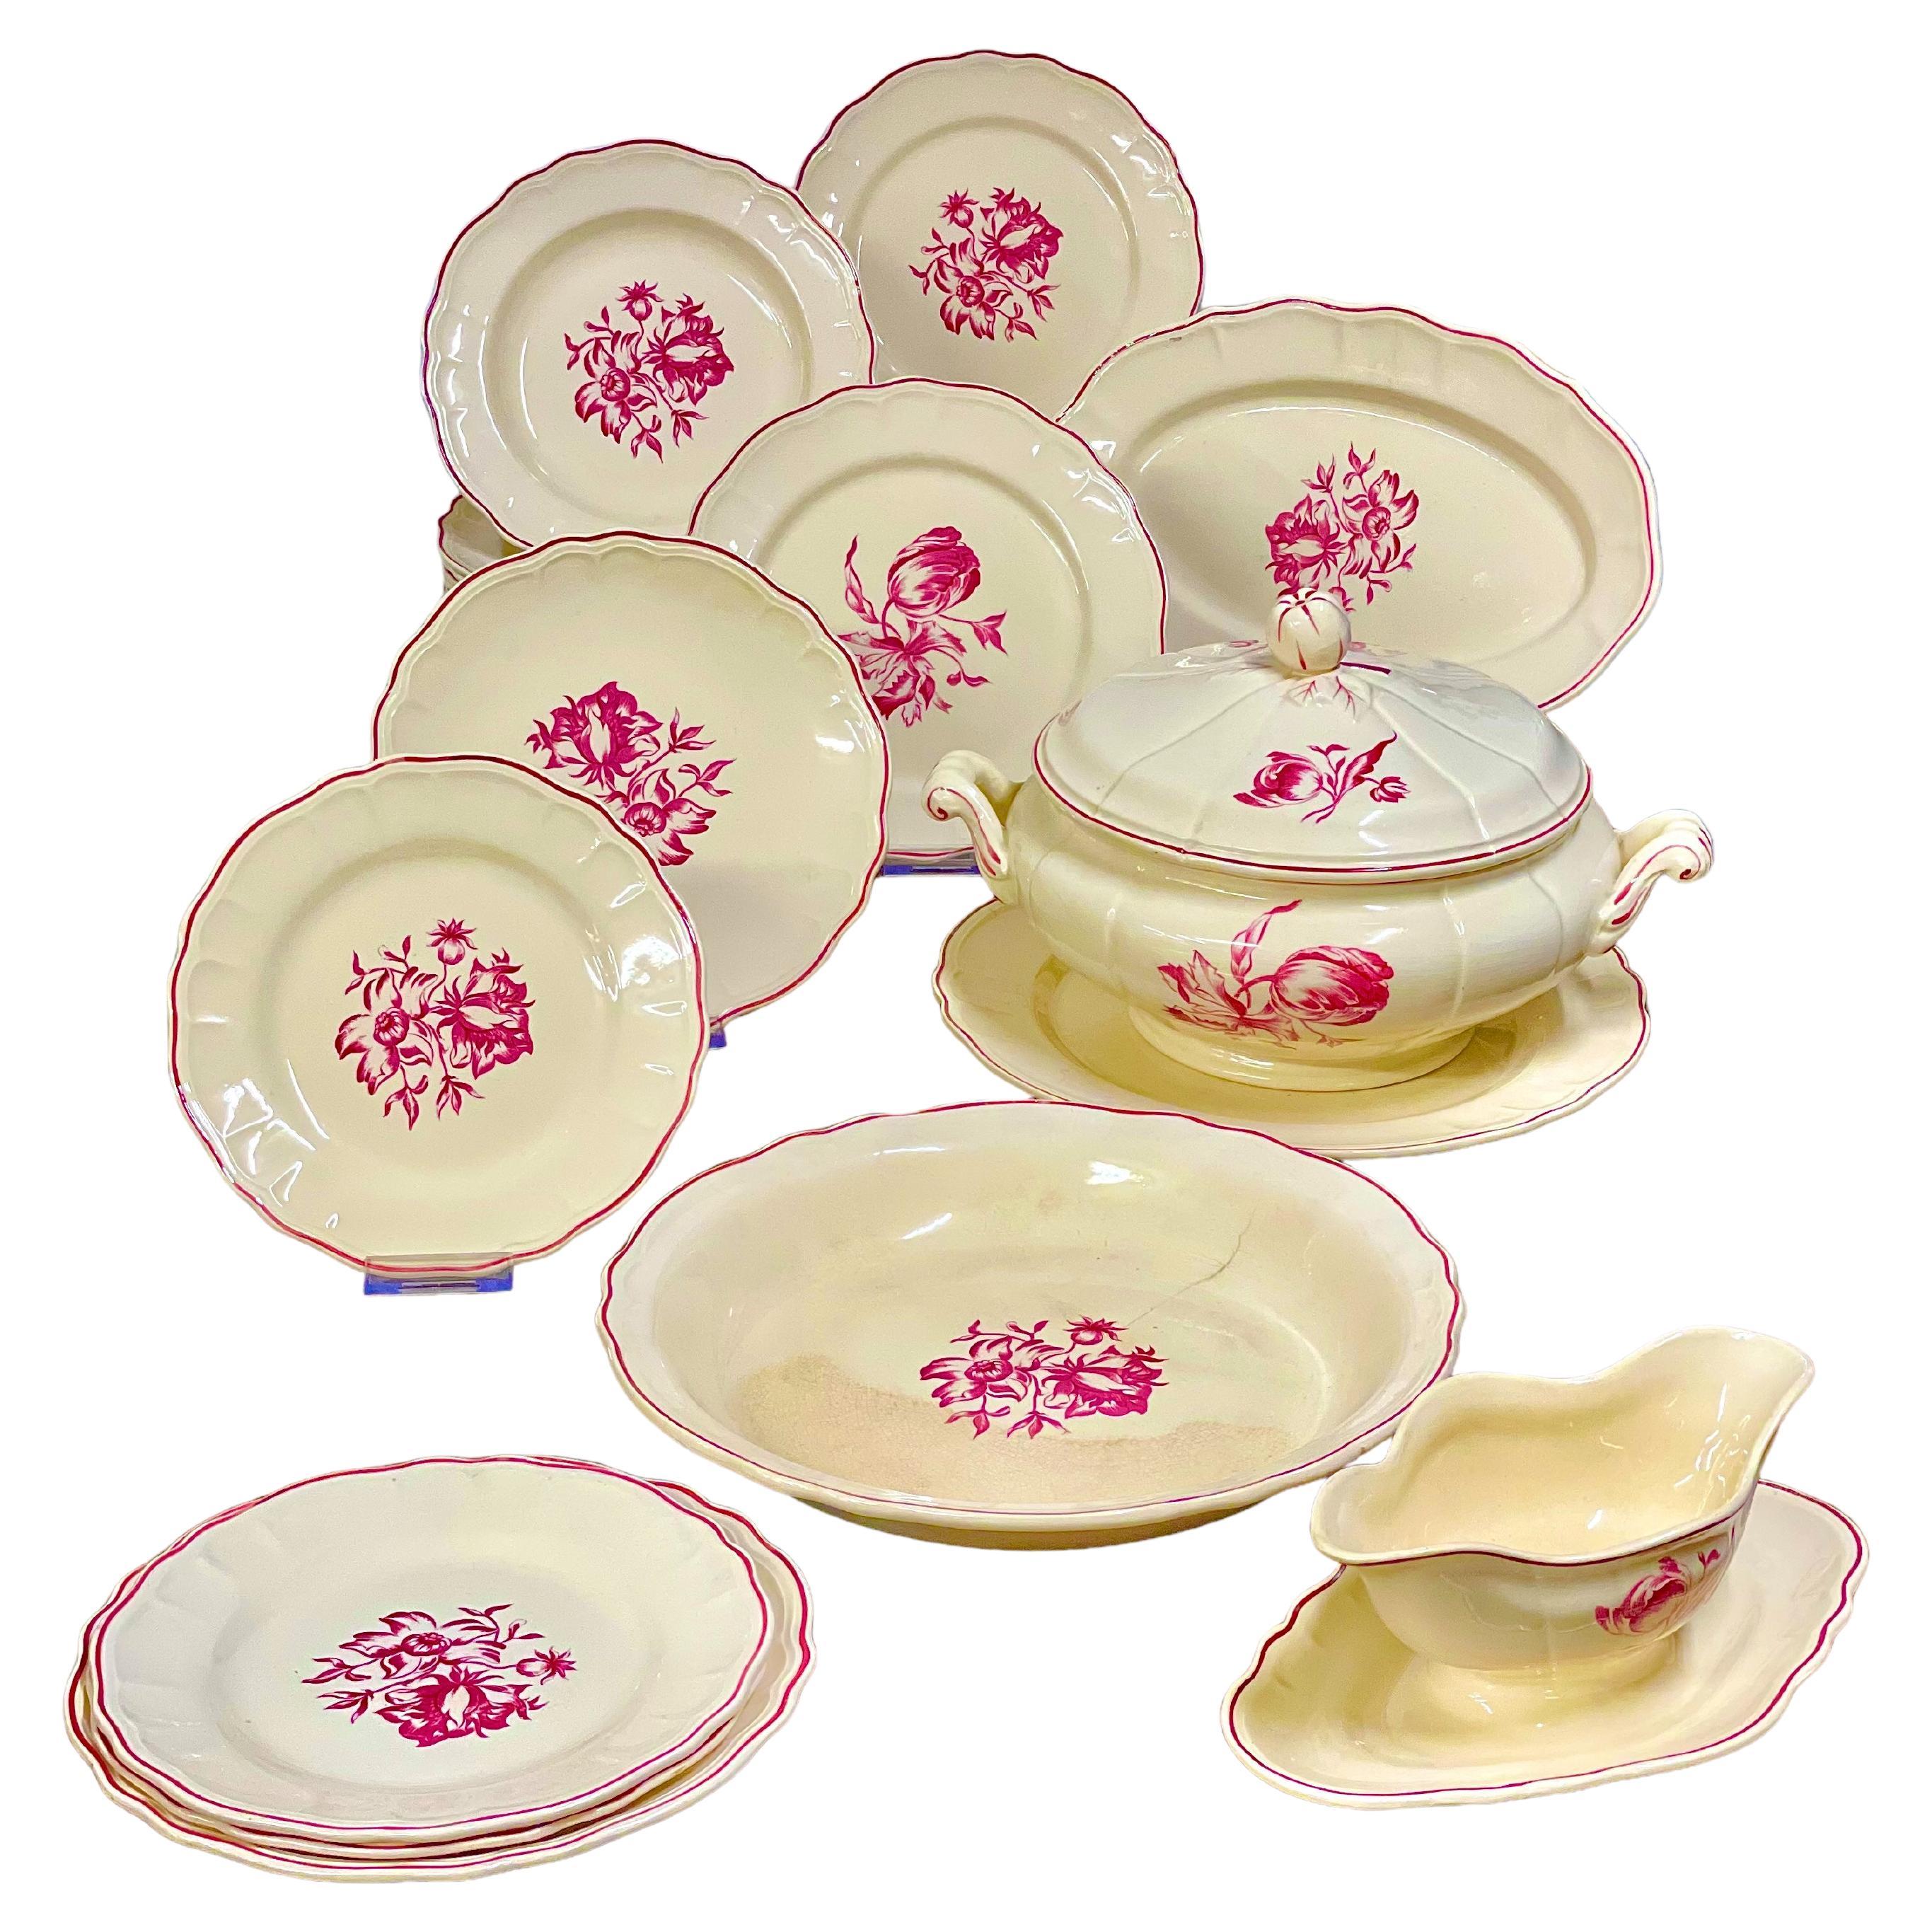 Vintage Creamware Dinner set of 34 Pieces For Sale